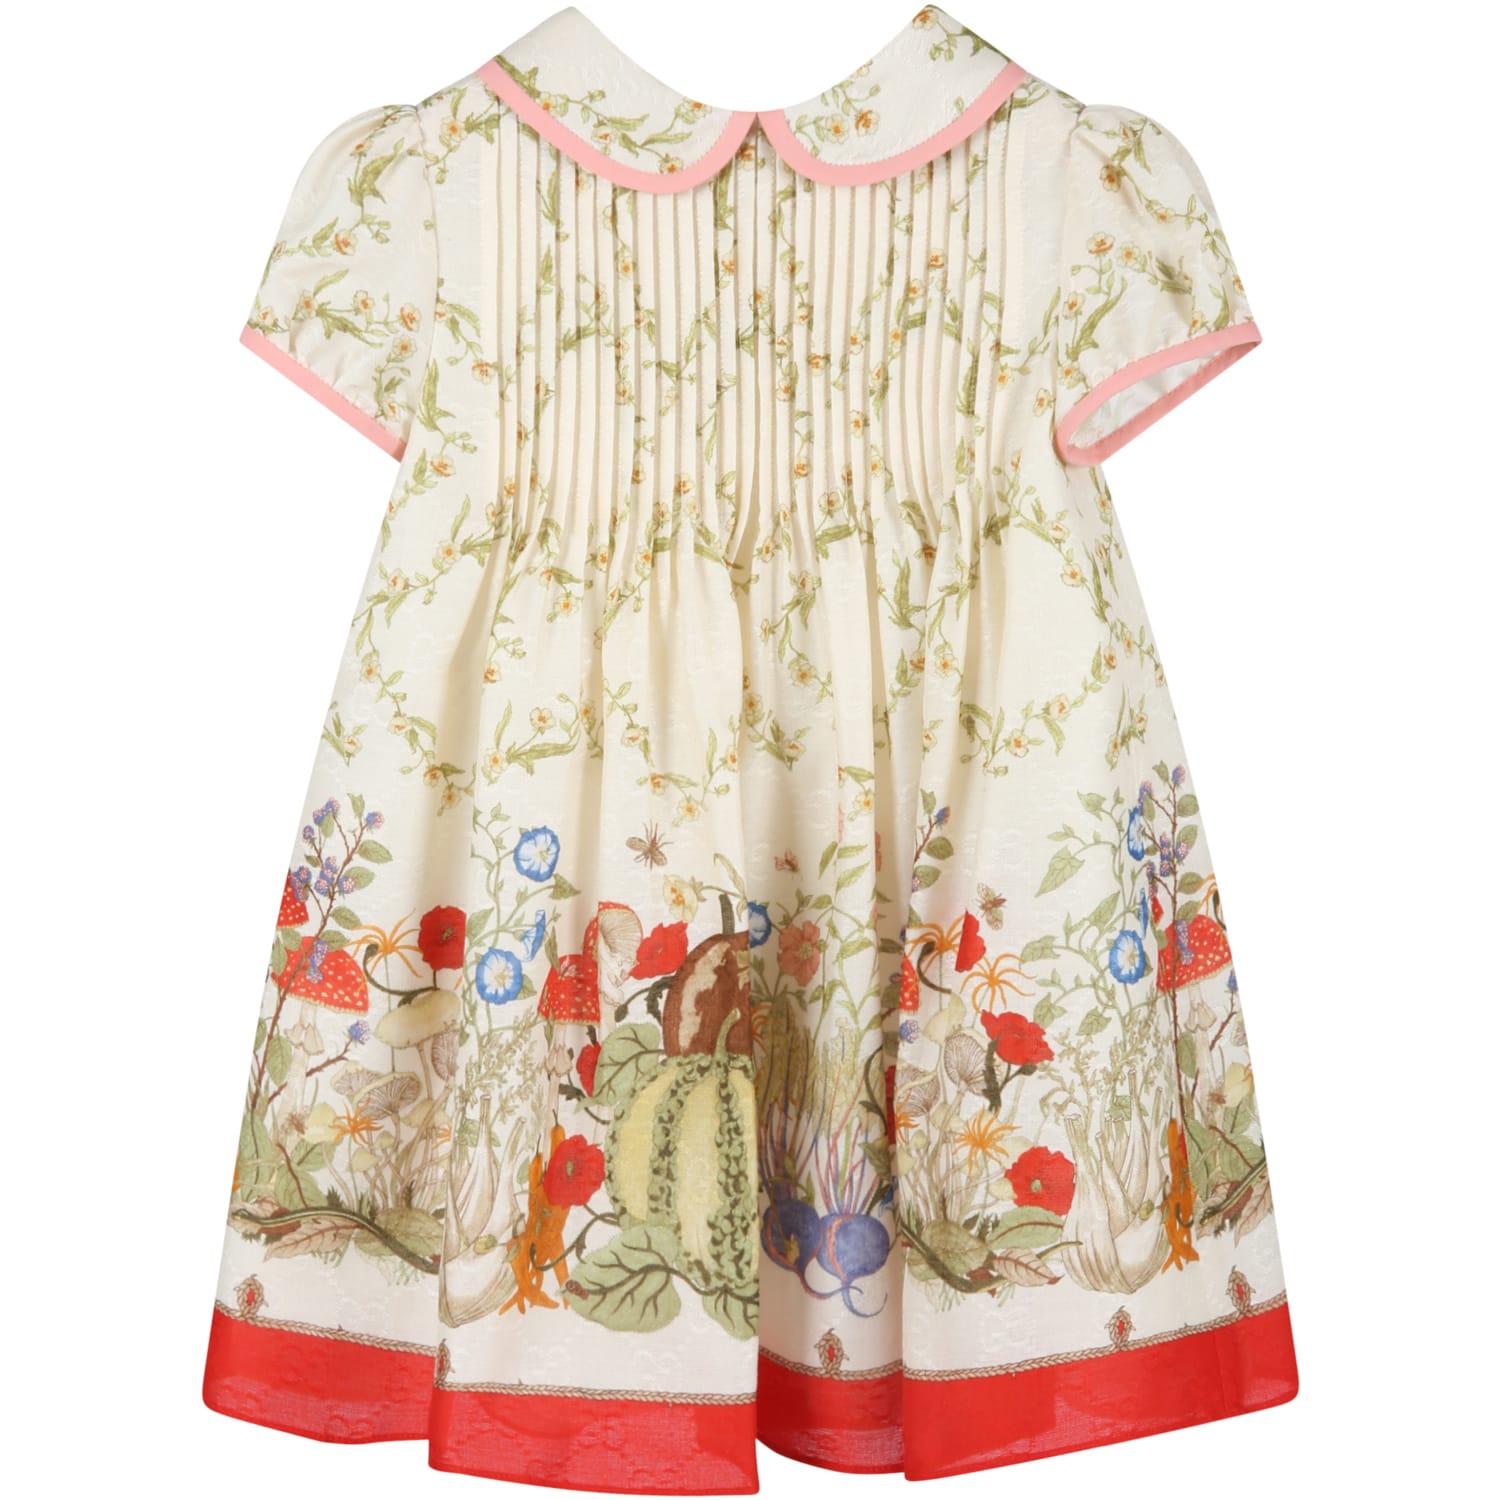 Gucci Ivory Dress For Baby Girl With Floral Print.